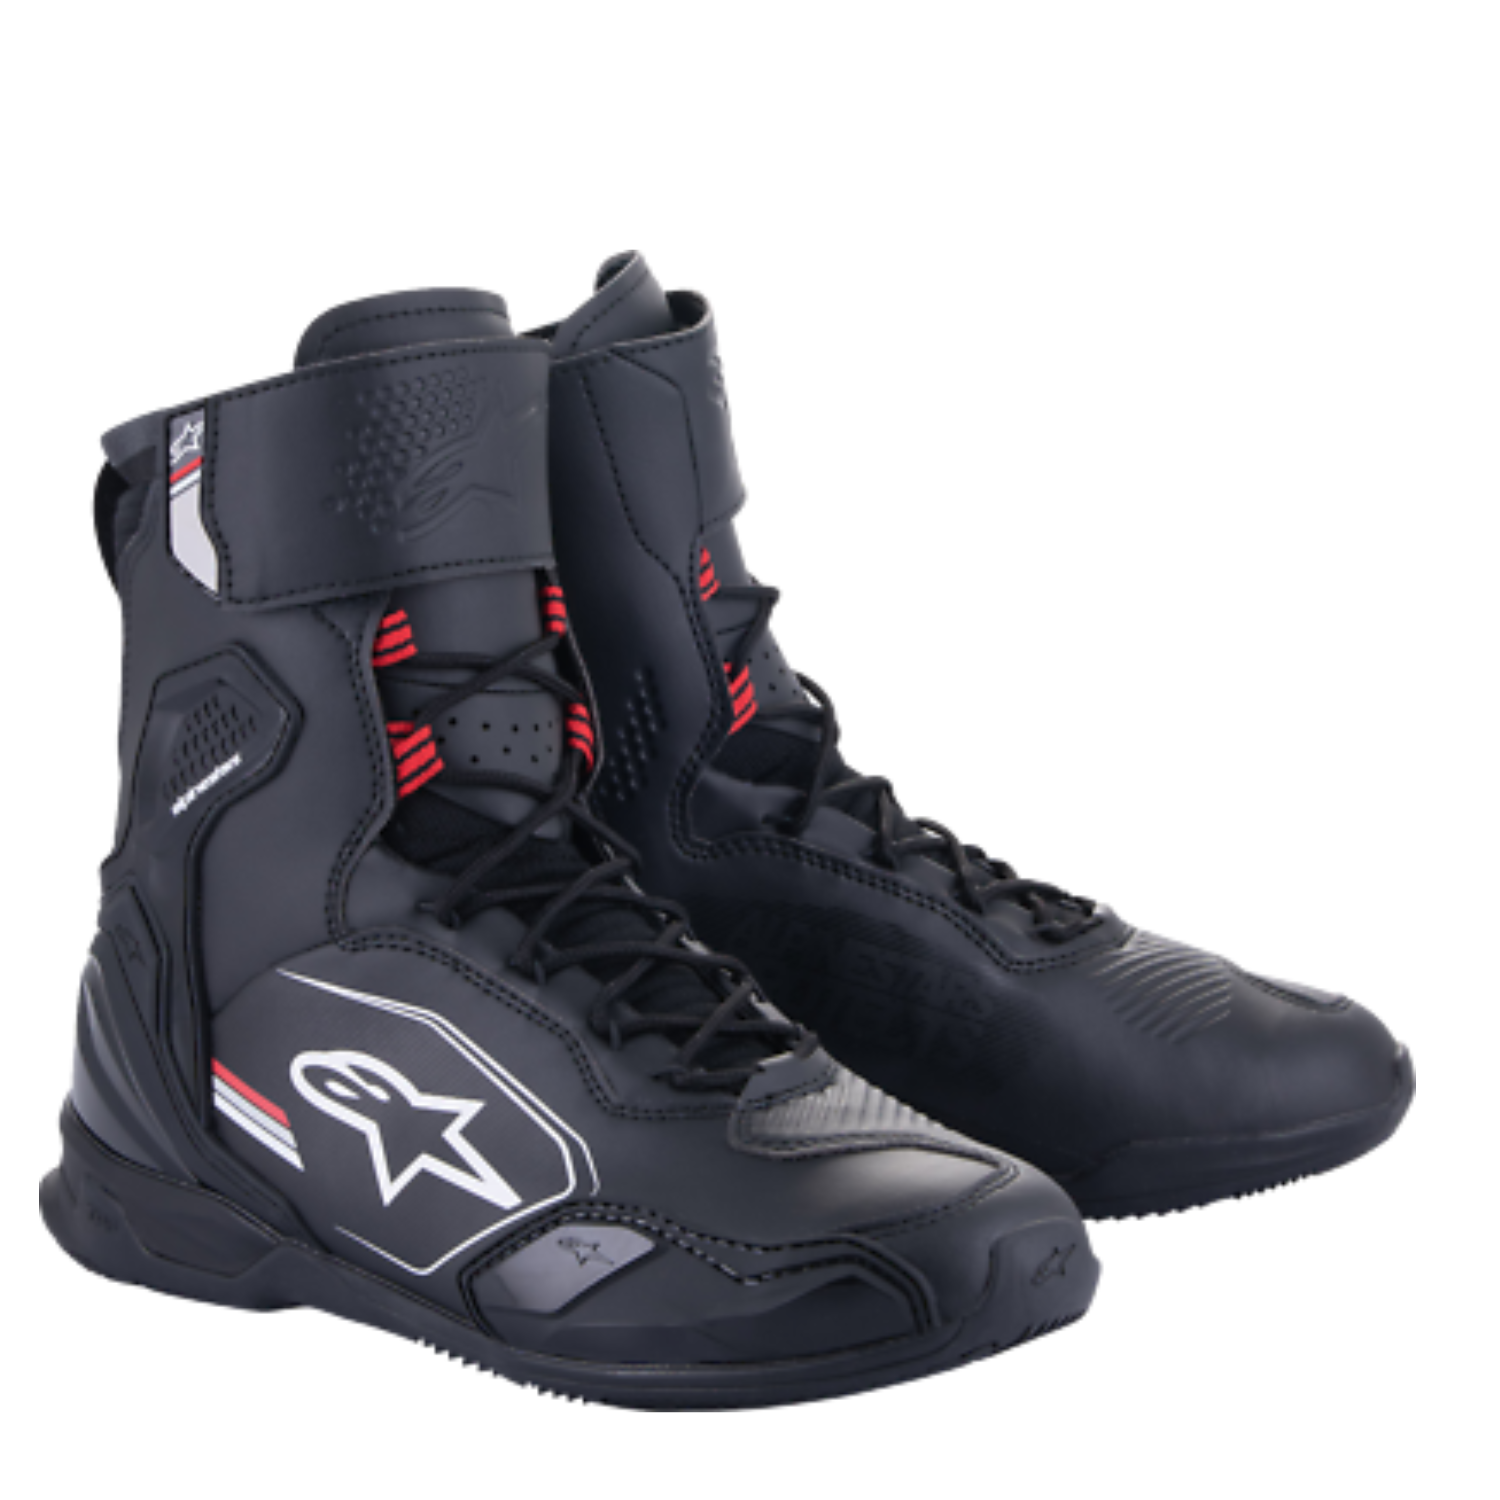 Image of Alpinestars Superfaster Shoes Black Gray Bright Red Size US 9 ID 8059347252612